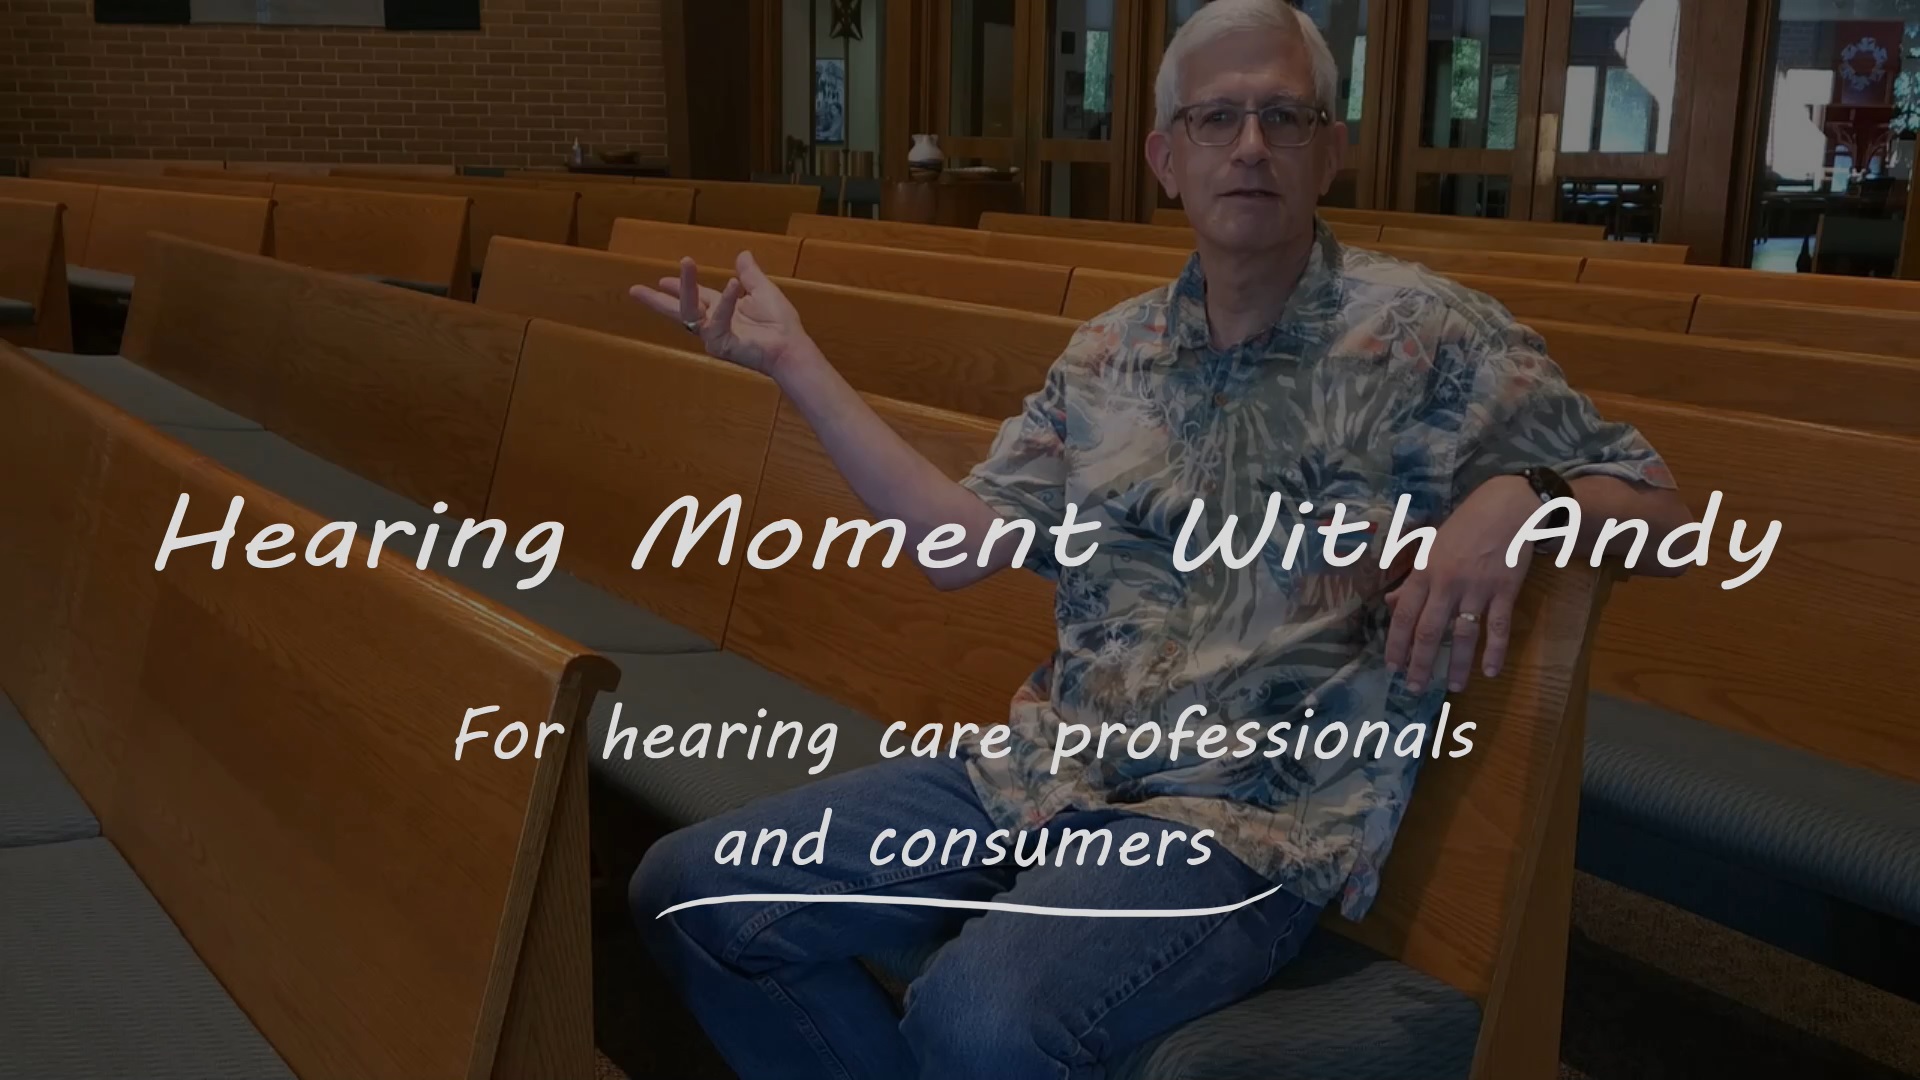 Featured image for “AuraFuturity Launches New Short Video Series “Hearing Moment With Andy””